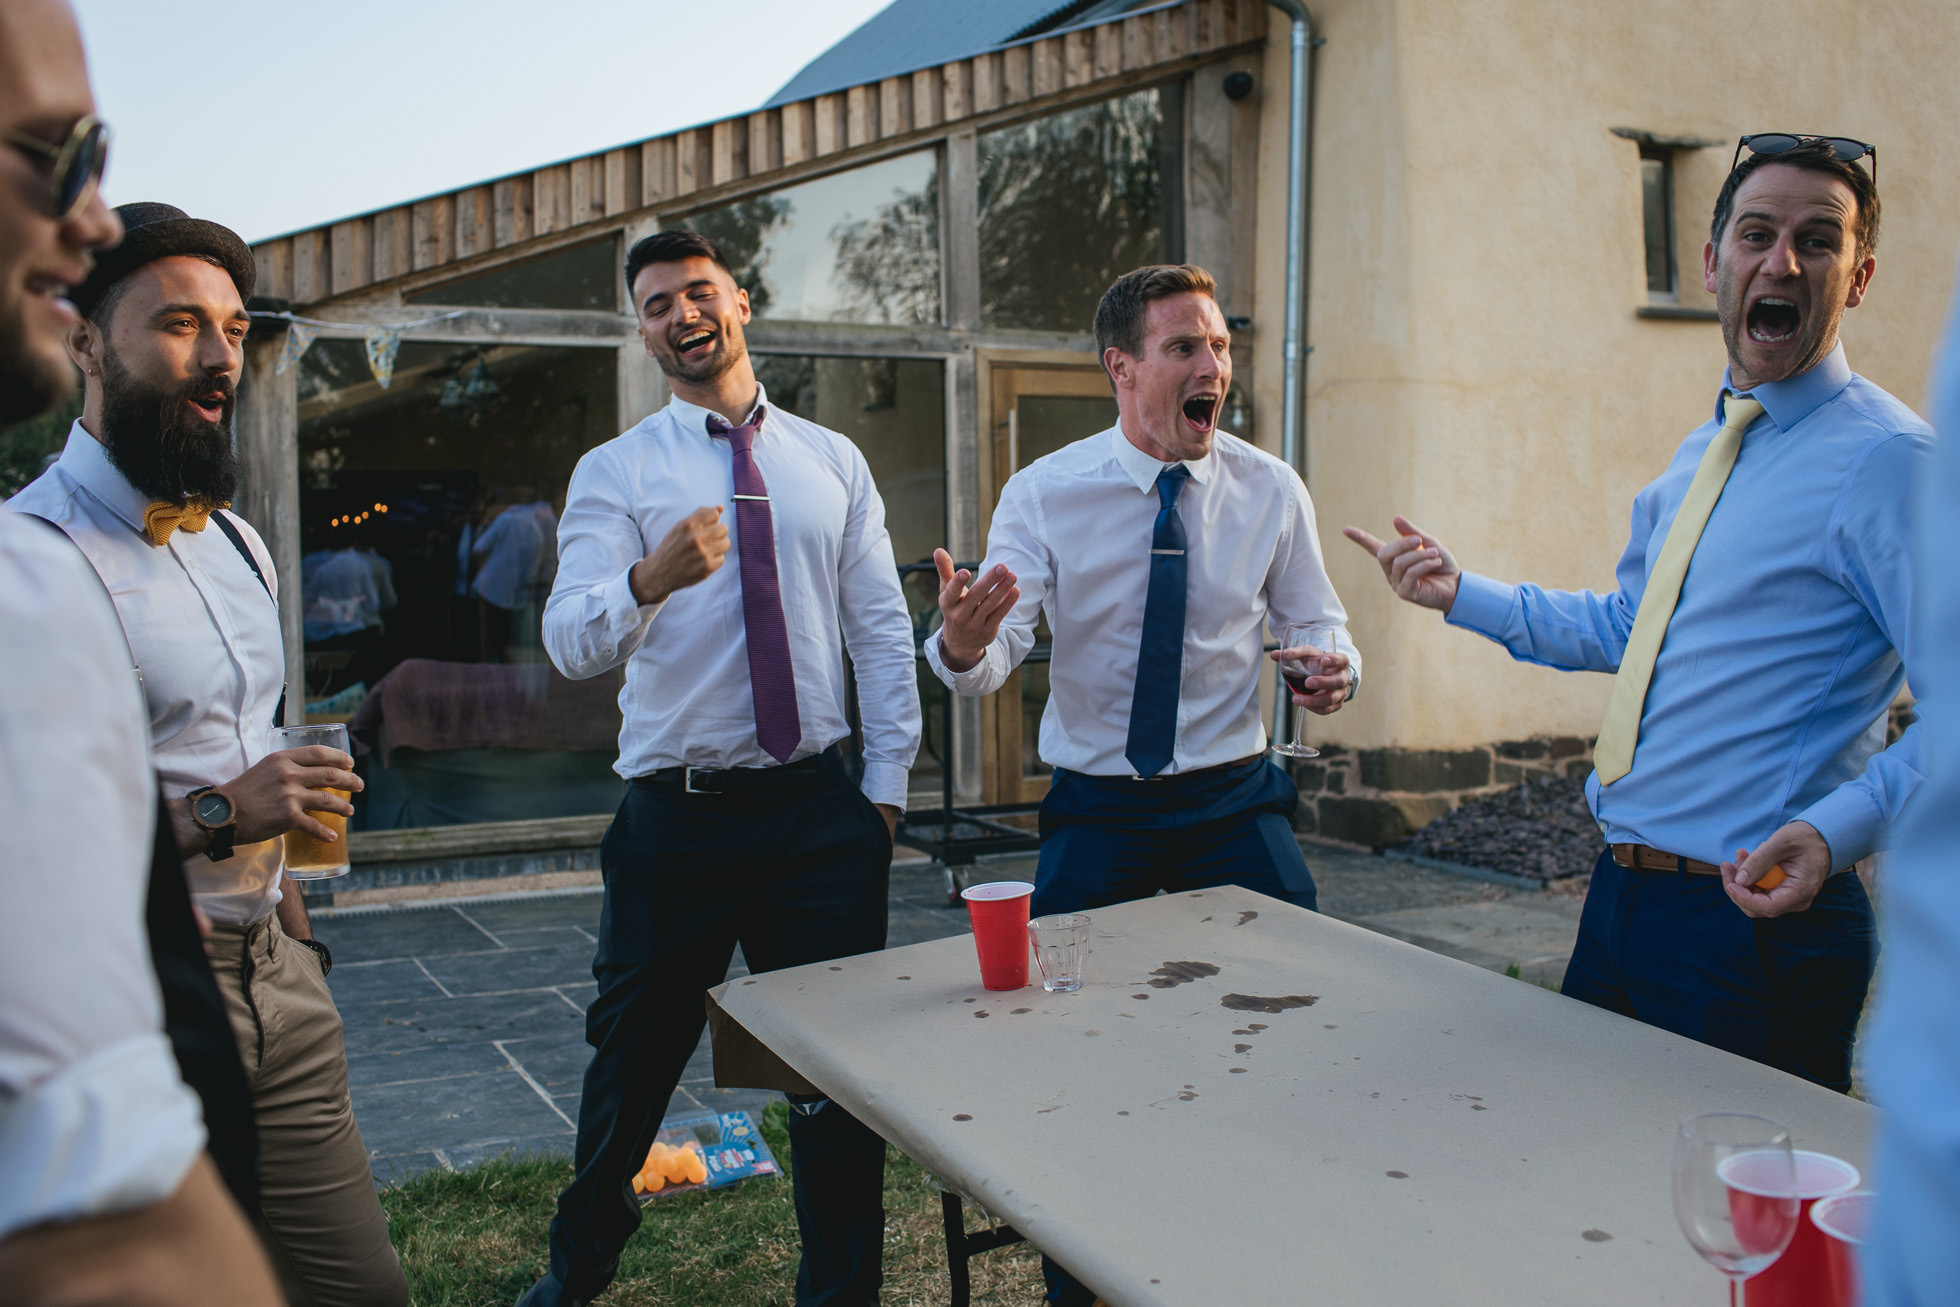 Wedding guests playing beer pong